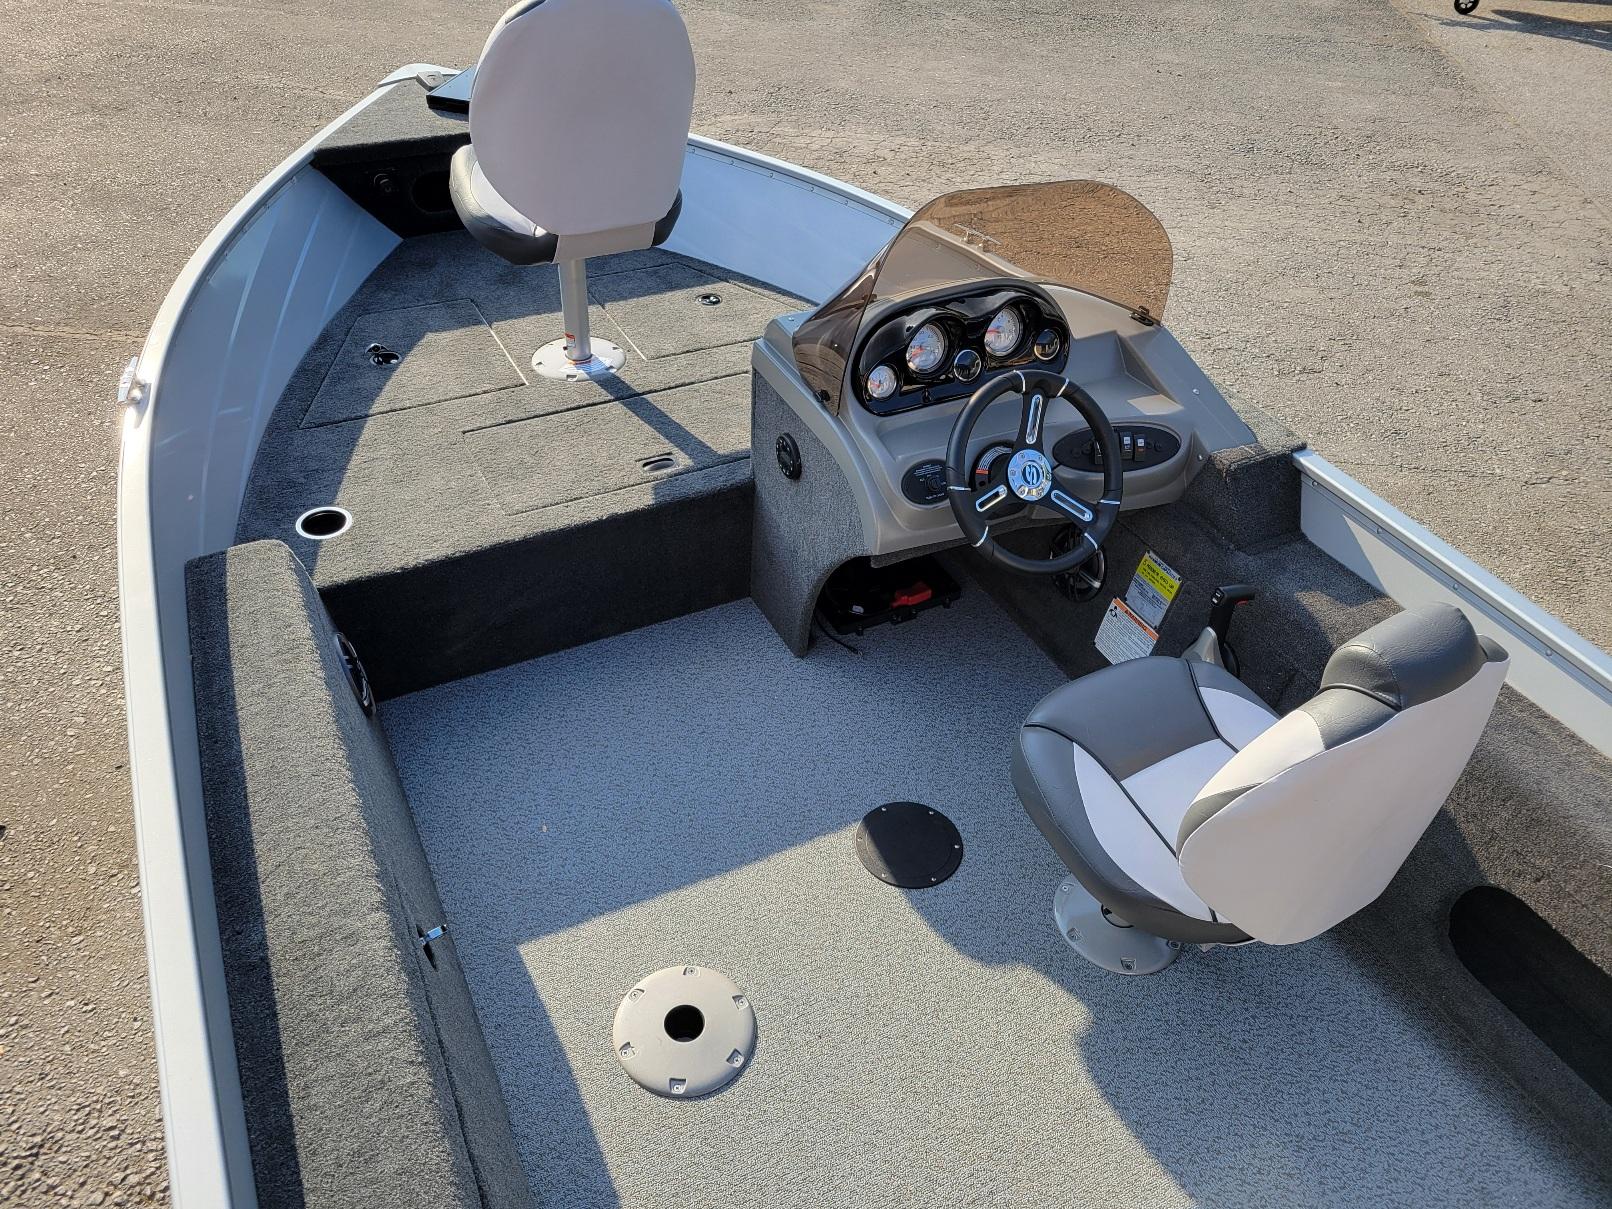 2024 Smoker Craft Pro Angler 161. 16' side console. (In stock!)